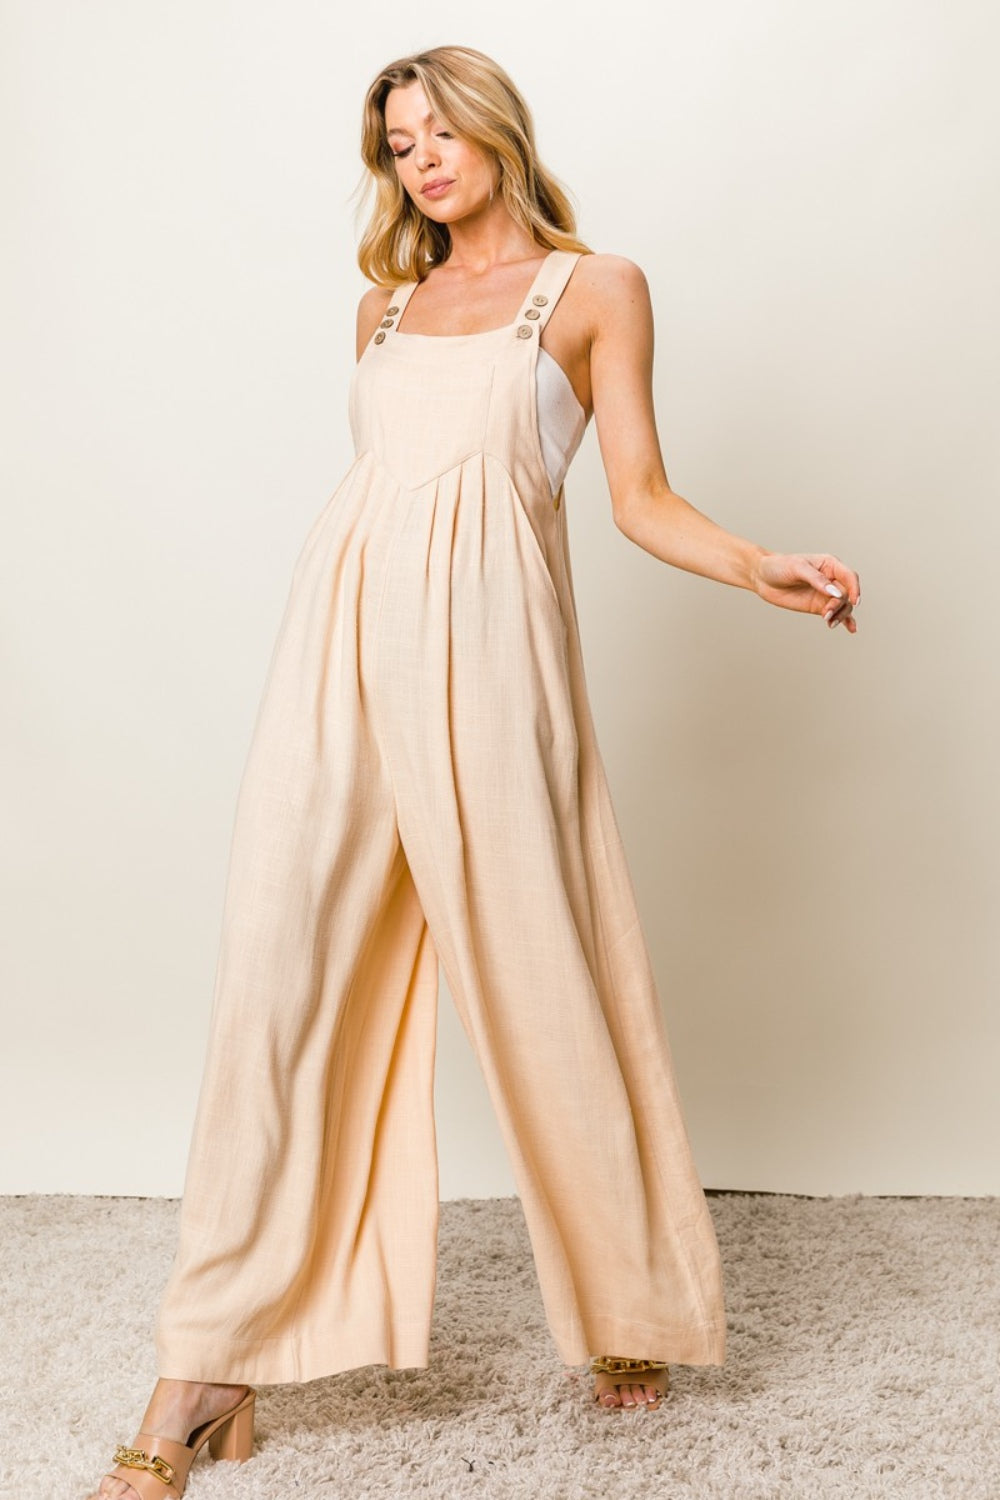 BiBi Texture Sleeveless Wide Leg Jumpsuit-Jumpsuits & Rompers-Inspired by Justeen-Women's Clothing Boutique in Chicago, Illinois